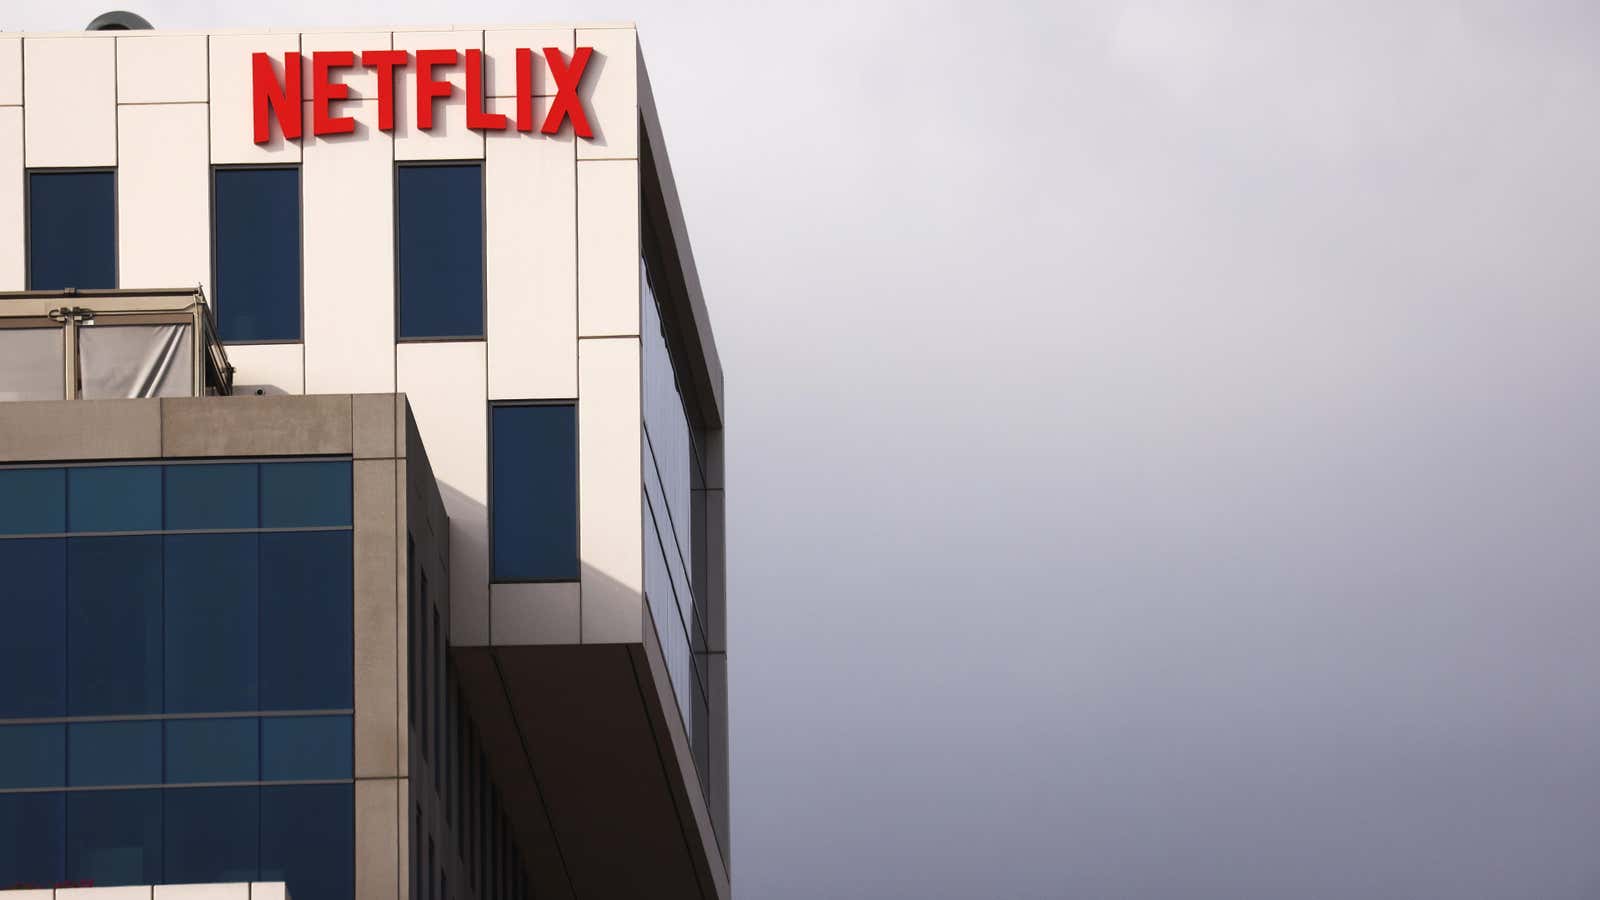 Where does Netflix go from here?